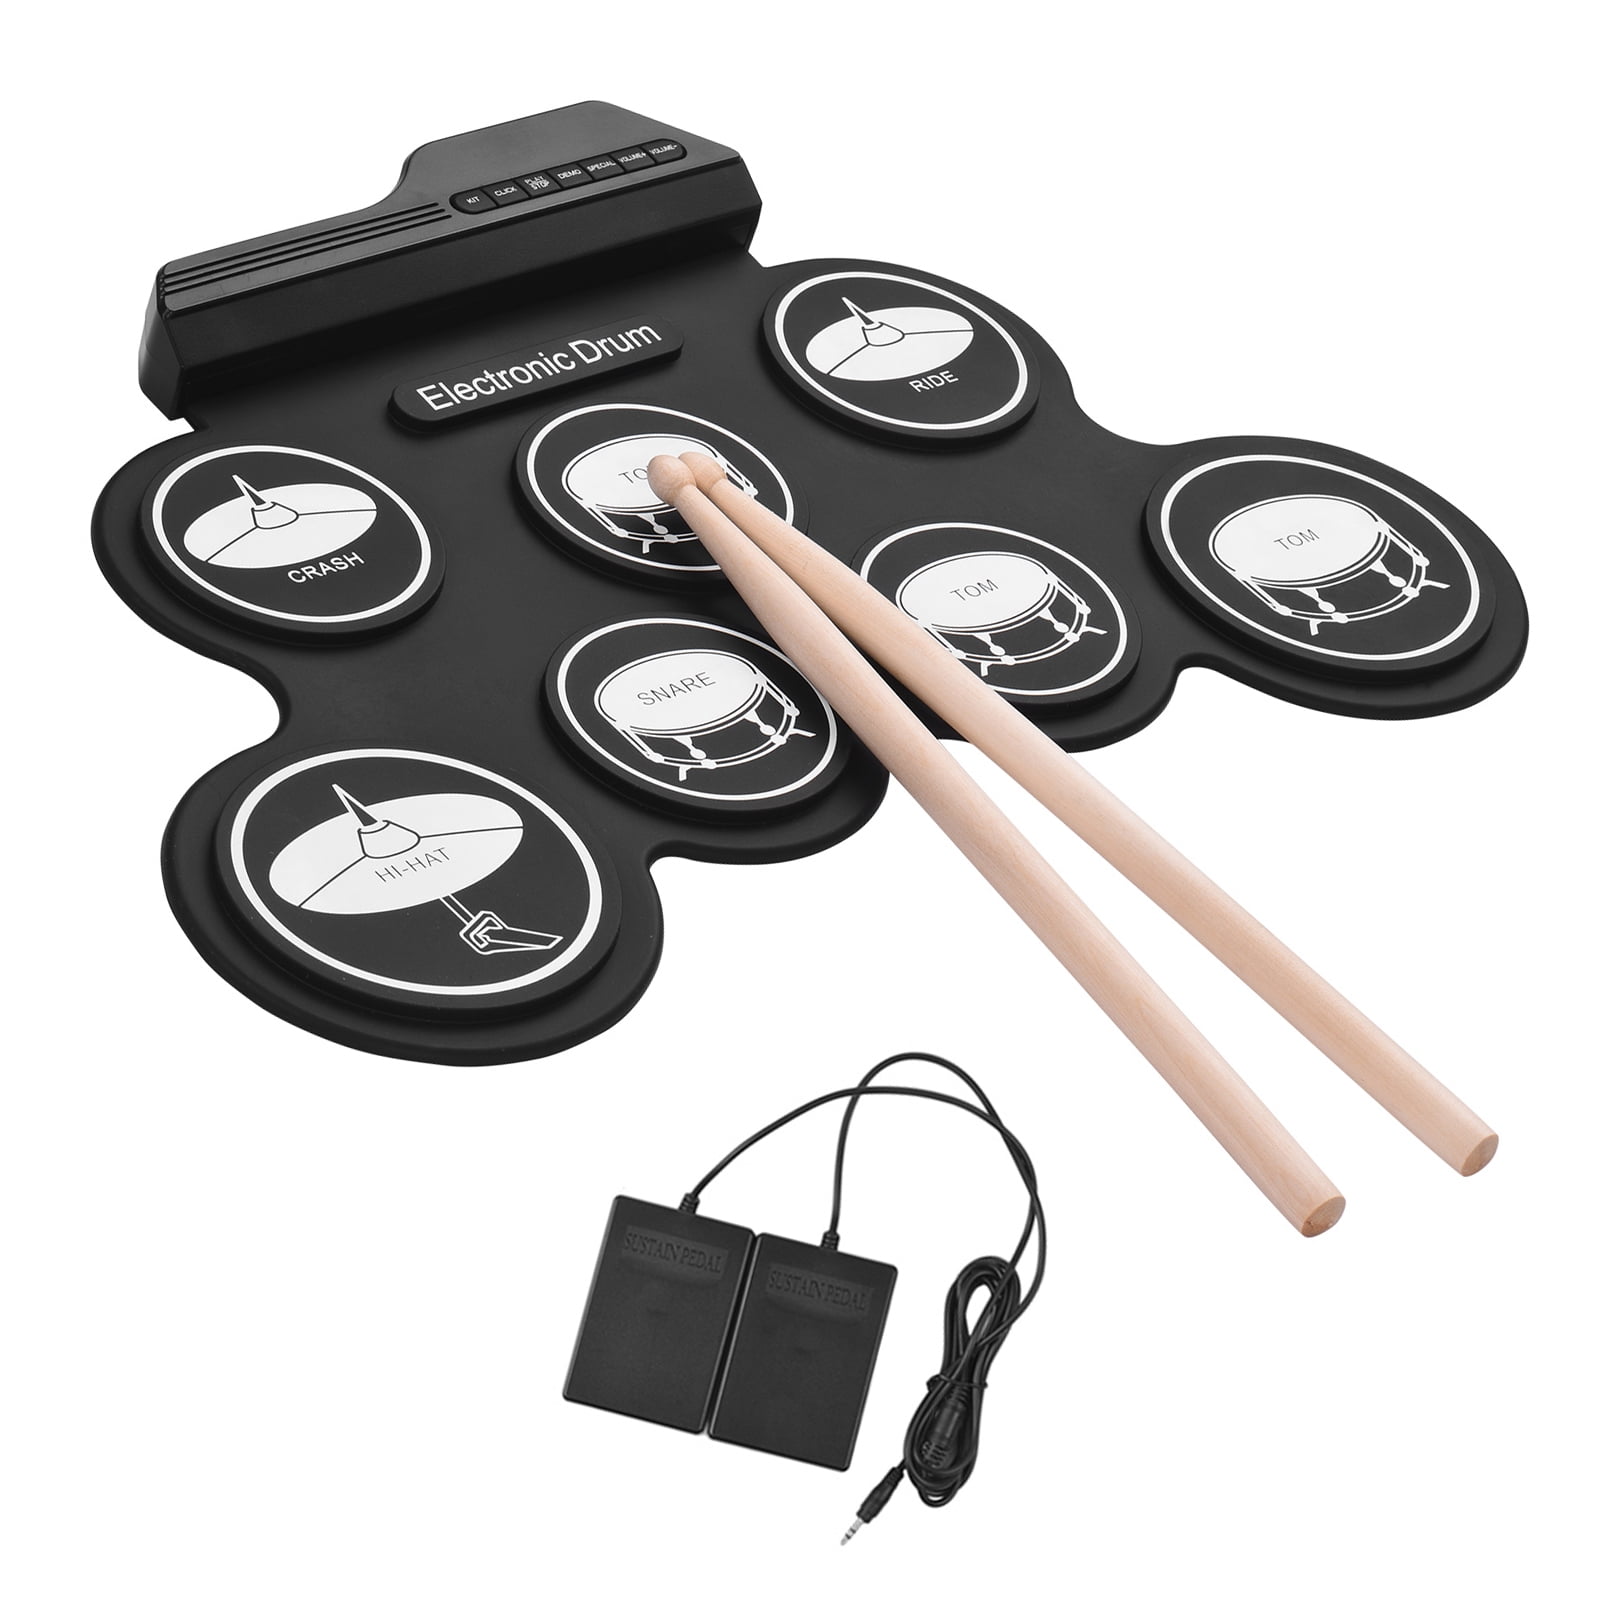 Top-Longer Portable Electronic Drum Pad Kit with Drum Sticks and Sustain  Pedal for Children - Electronic Drums Pad Set Kids Gift for Christmas Day